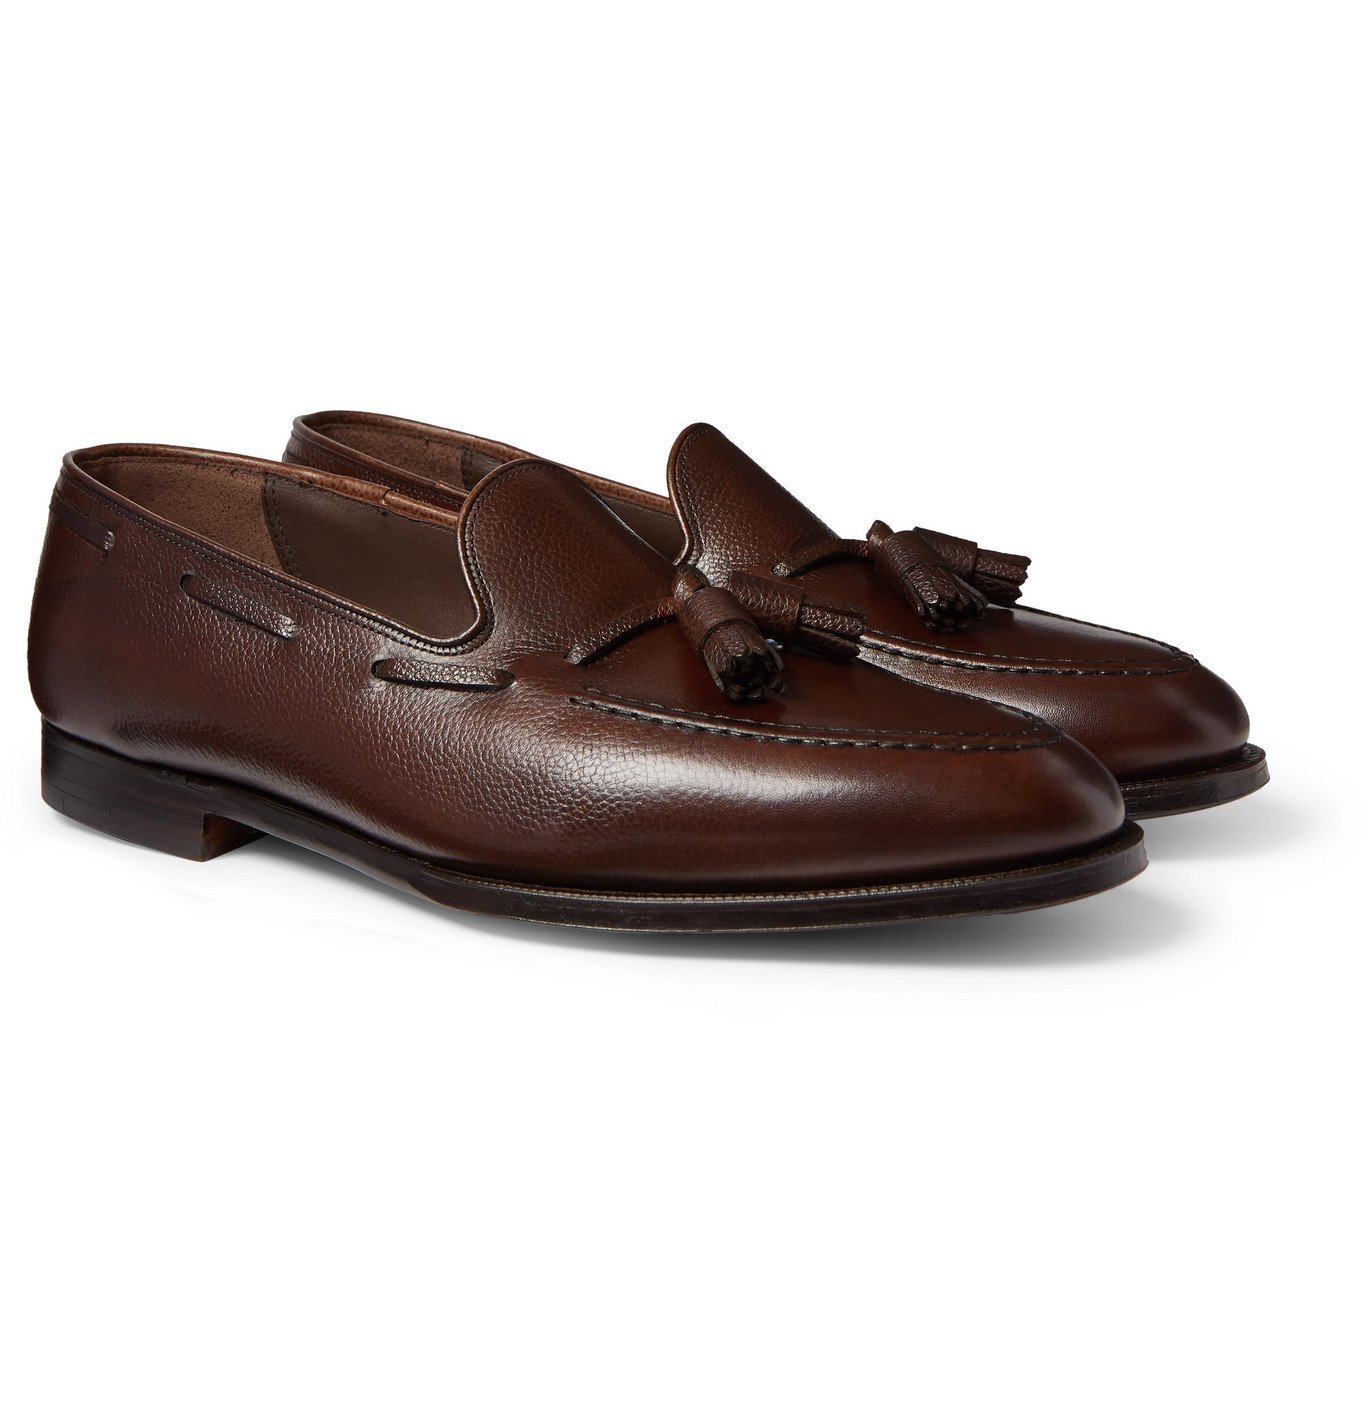 George Cleverley - Adrian Leather Tasselled Loafers - Brown George ...